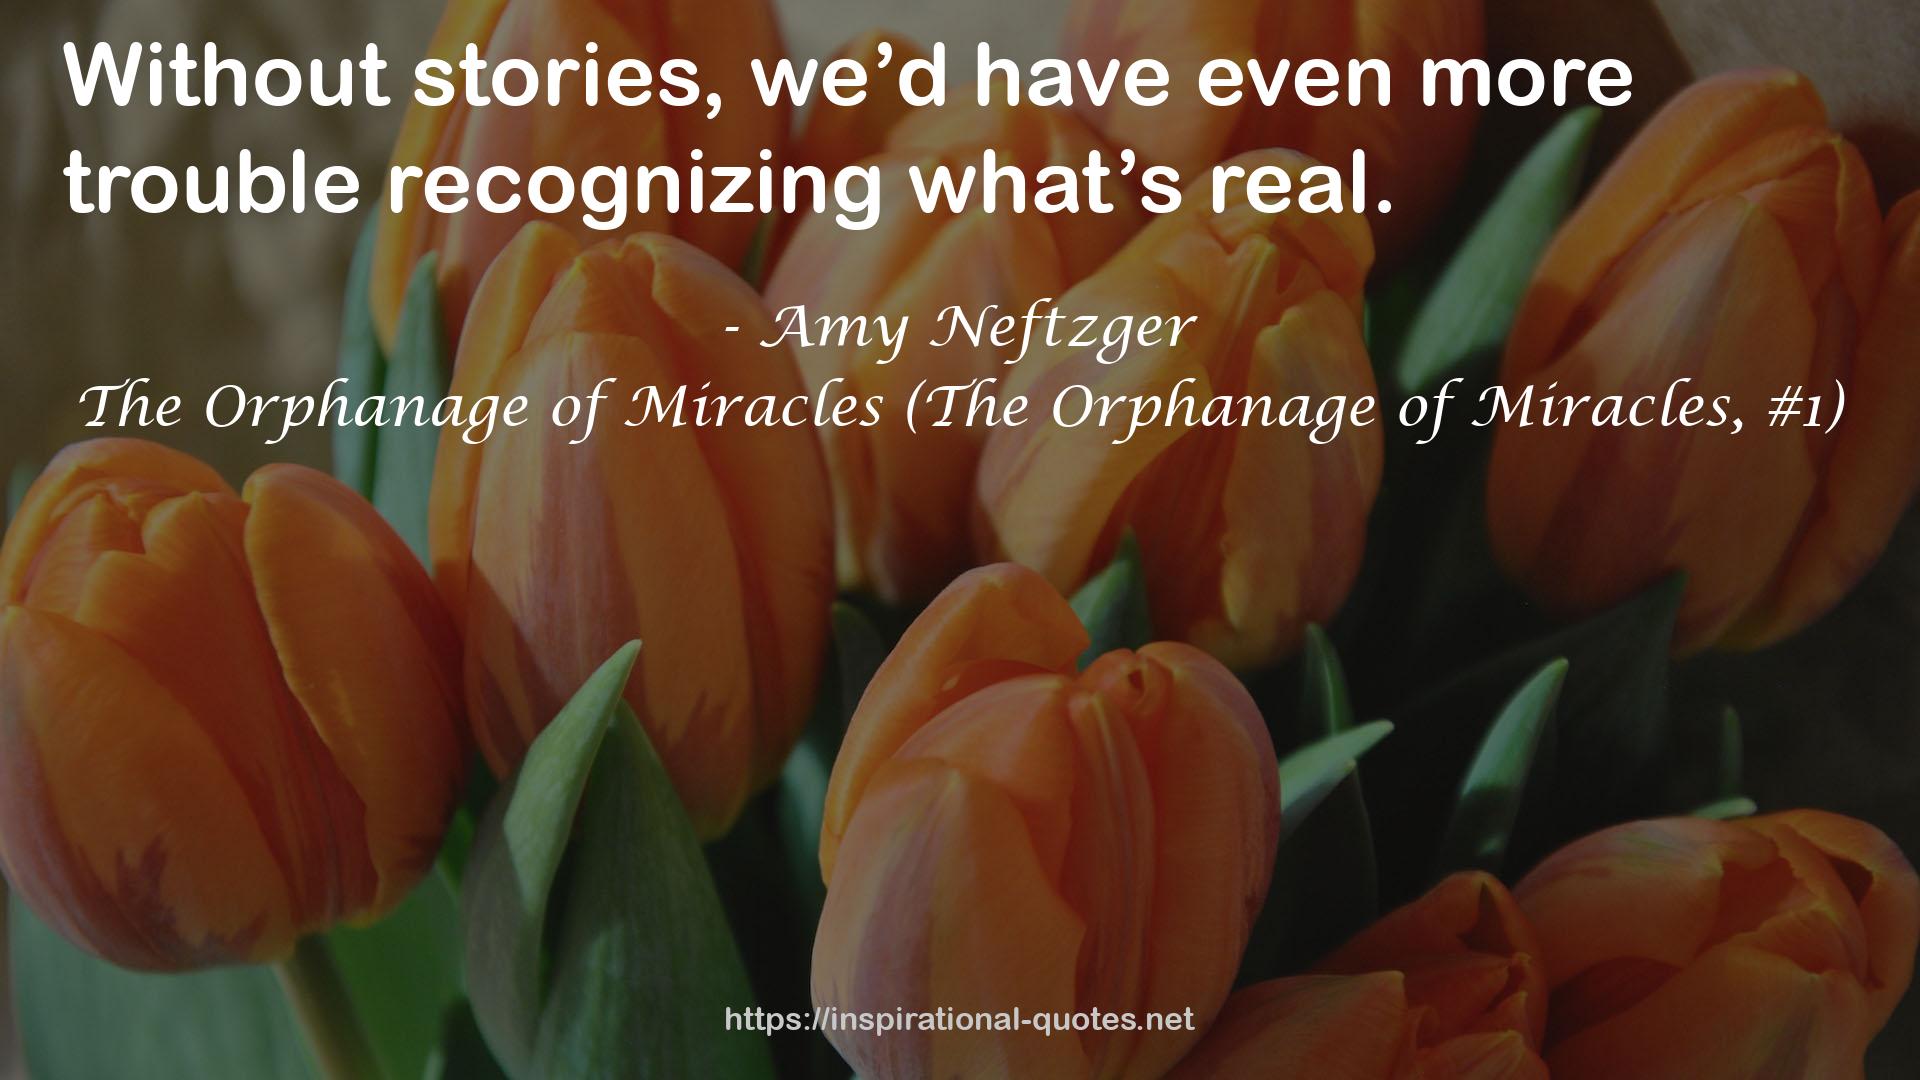 The Orphanage of Miracles (The Orphanage of Miracles, #1) QUOTES